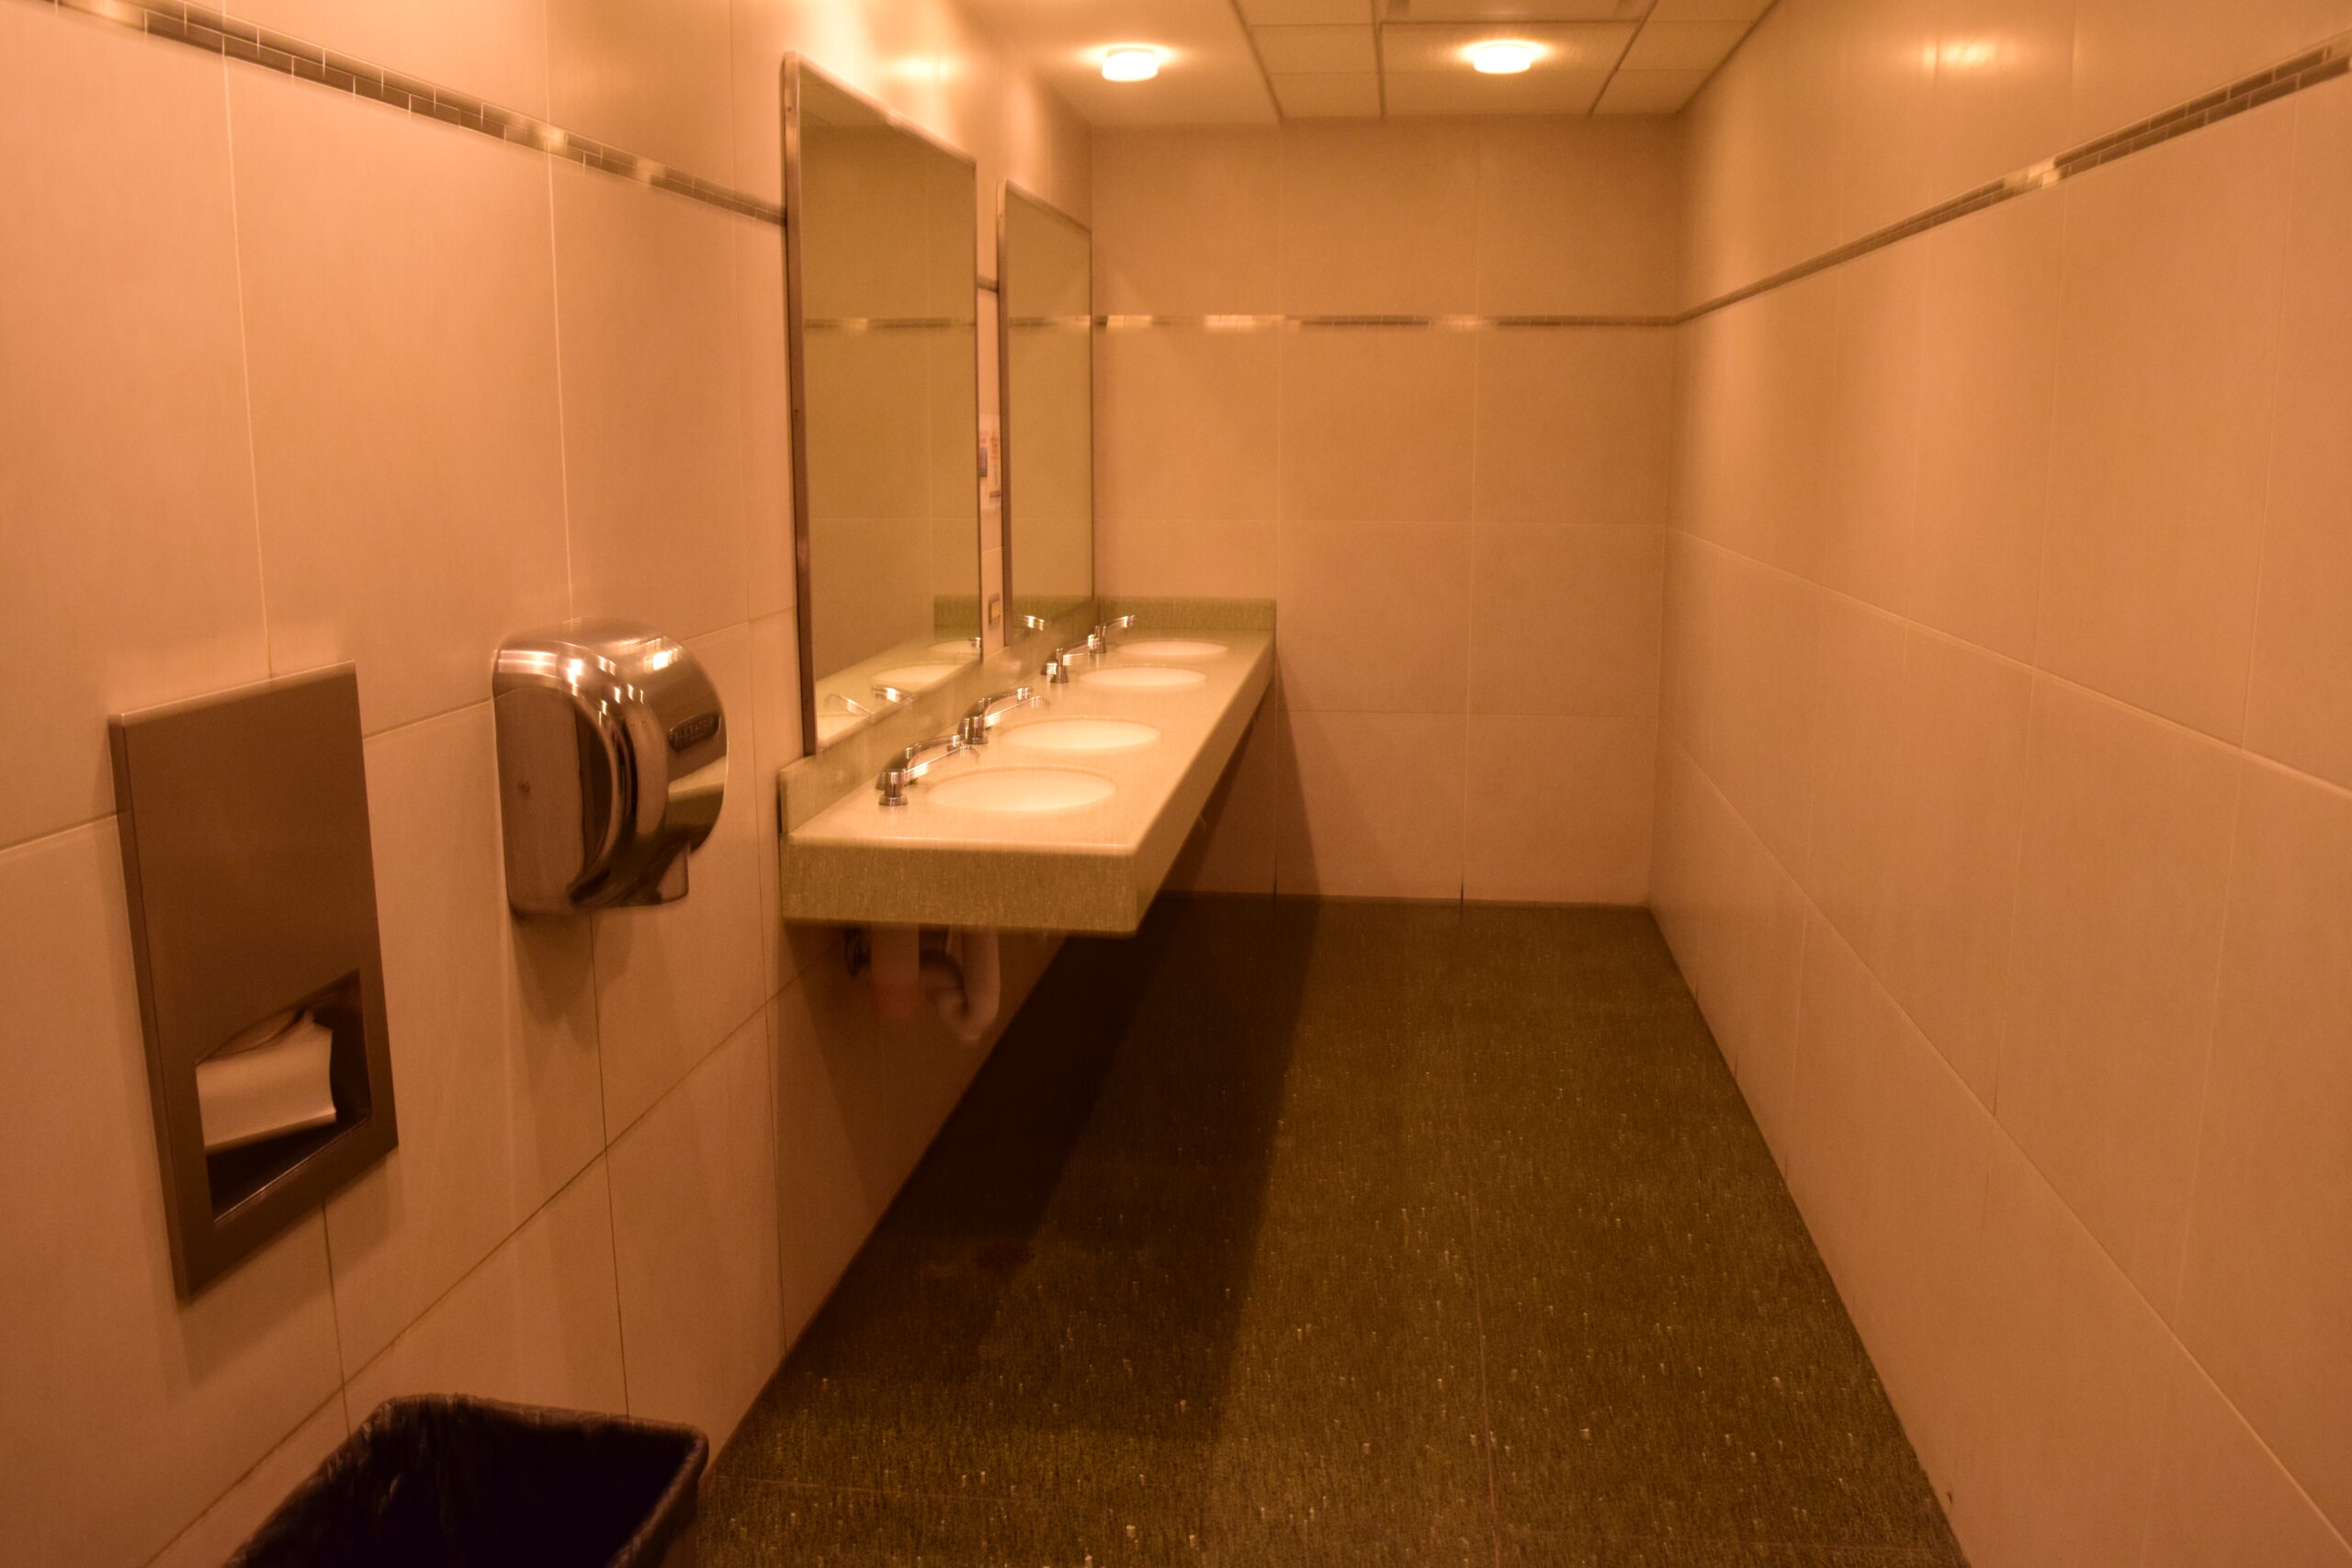 A row of sinks, with a paper towel dispenser and automatic air hand dryer to the left.